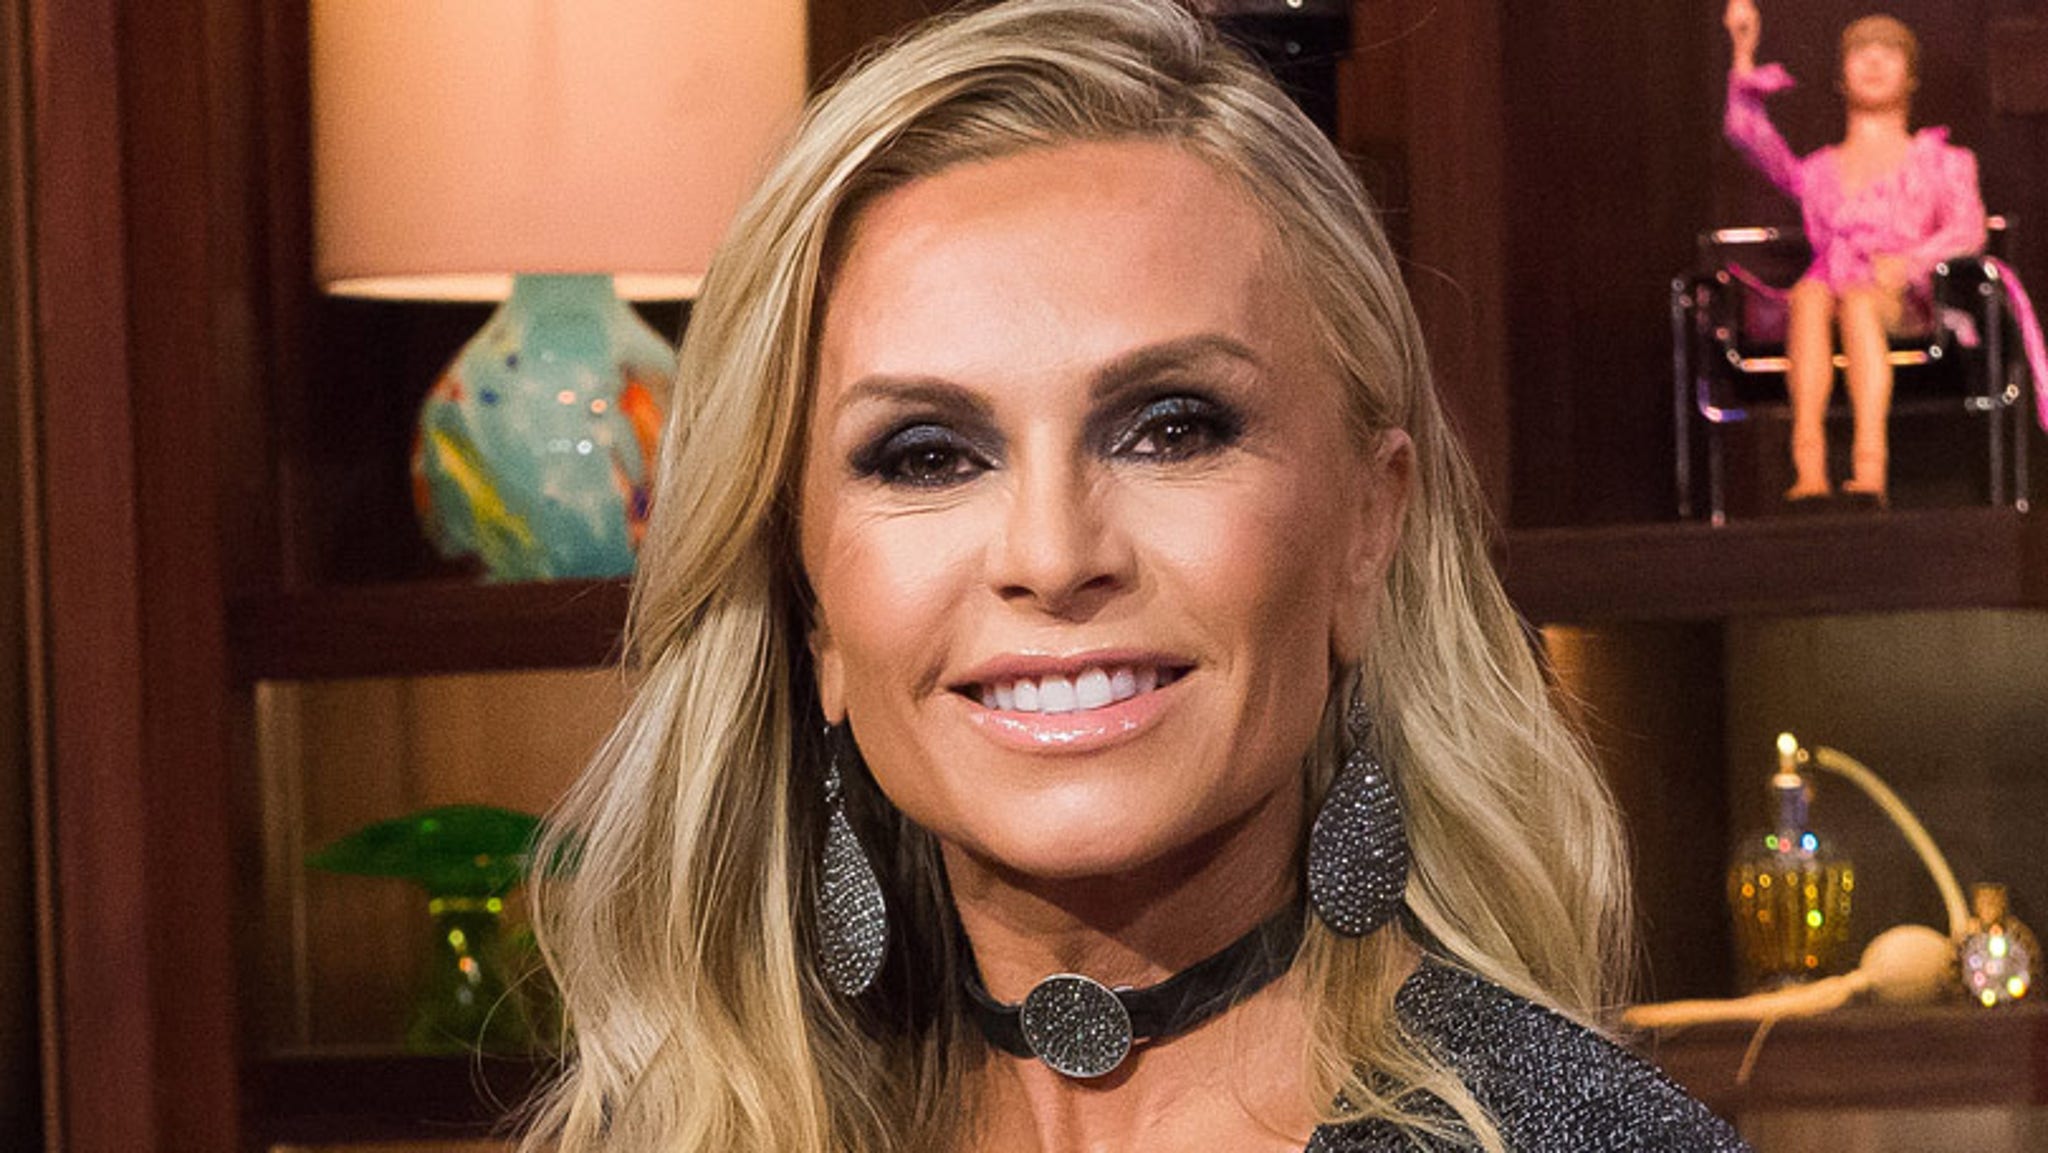 "RHOC" Tamra Judge Reveals Why She Doesn't Have A Belly Butt...